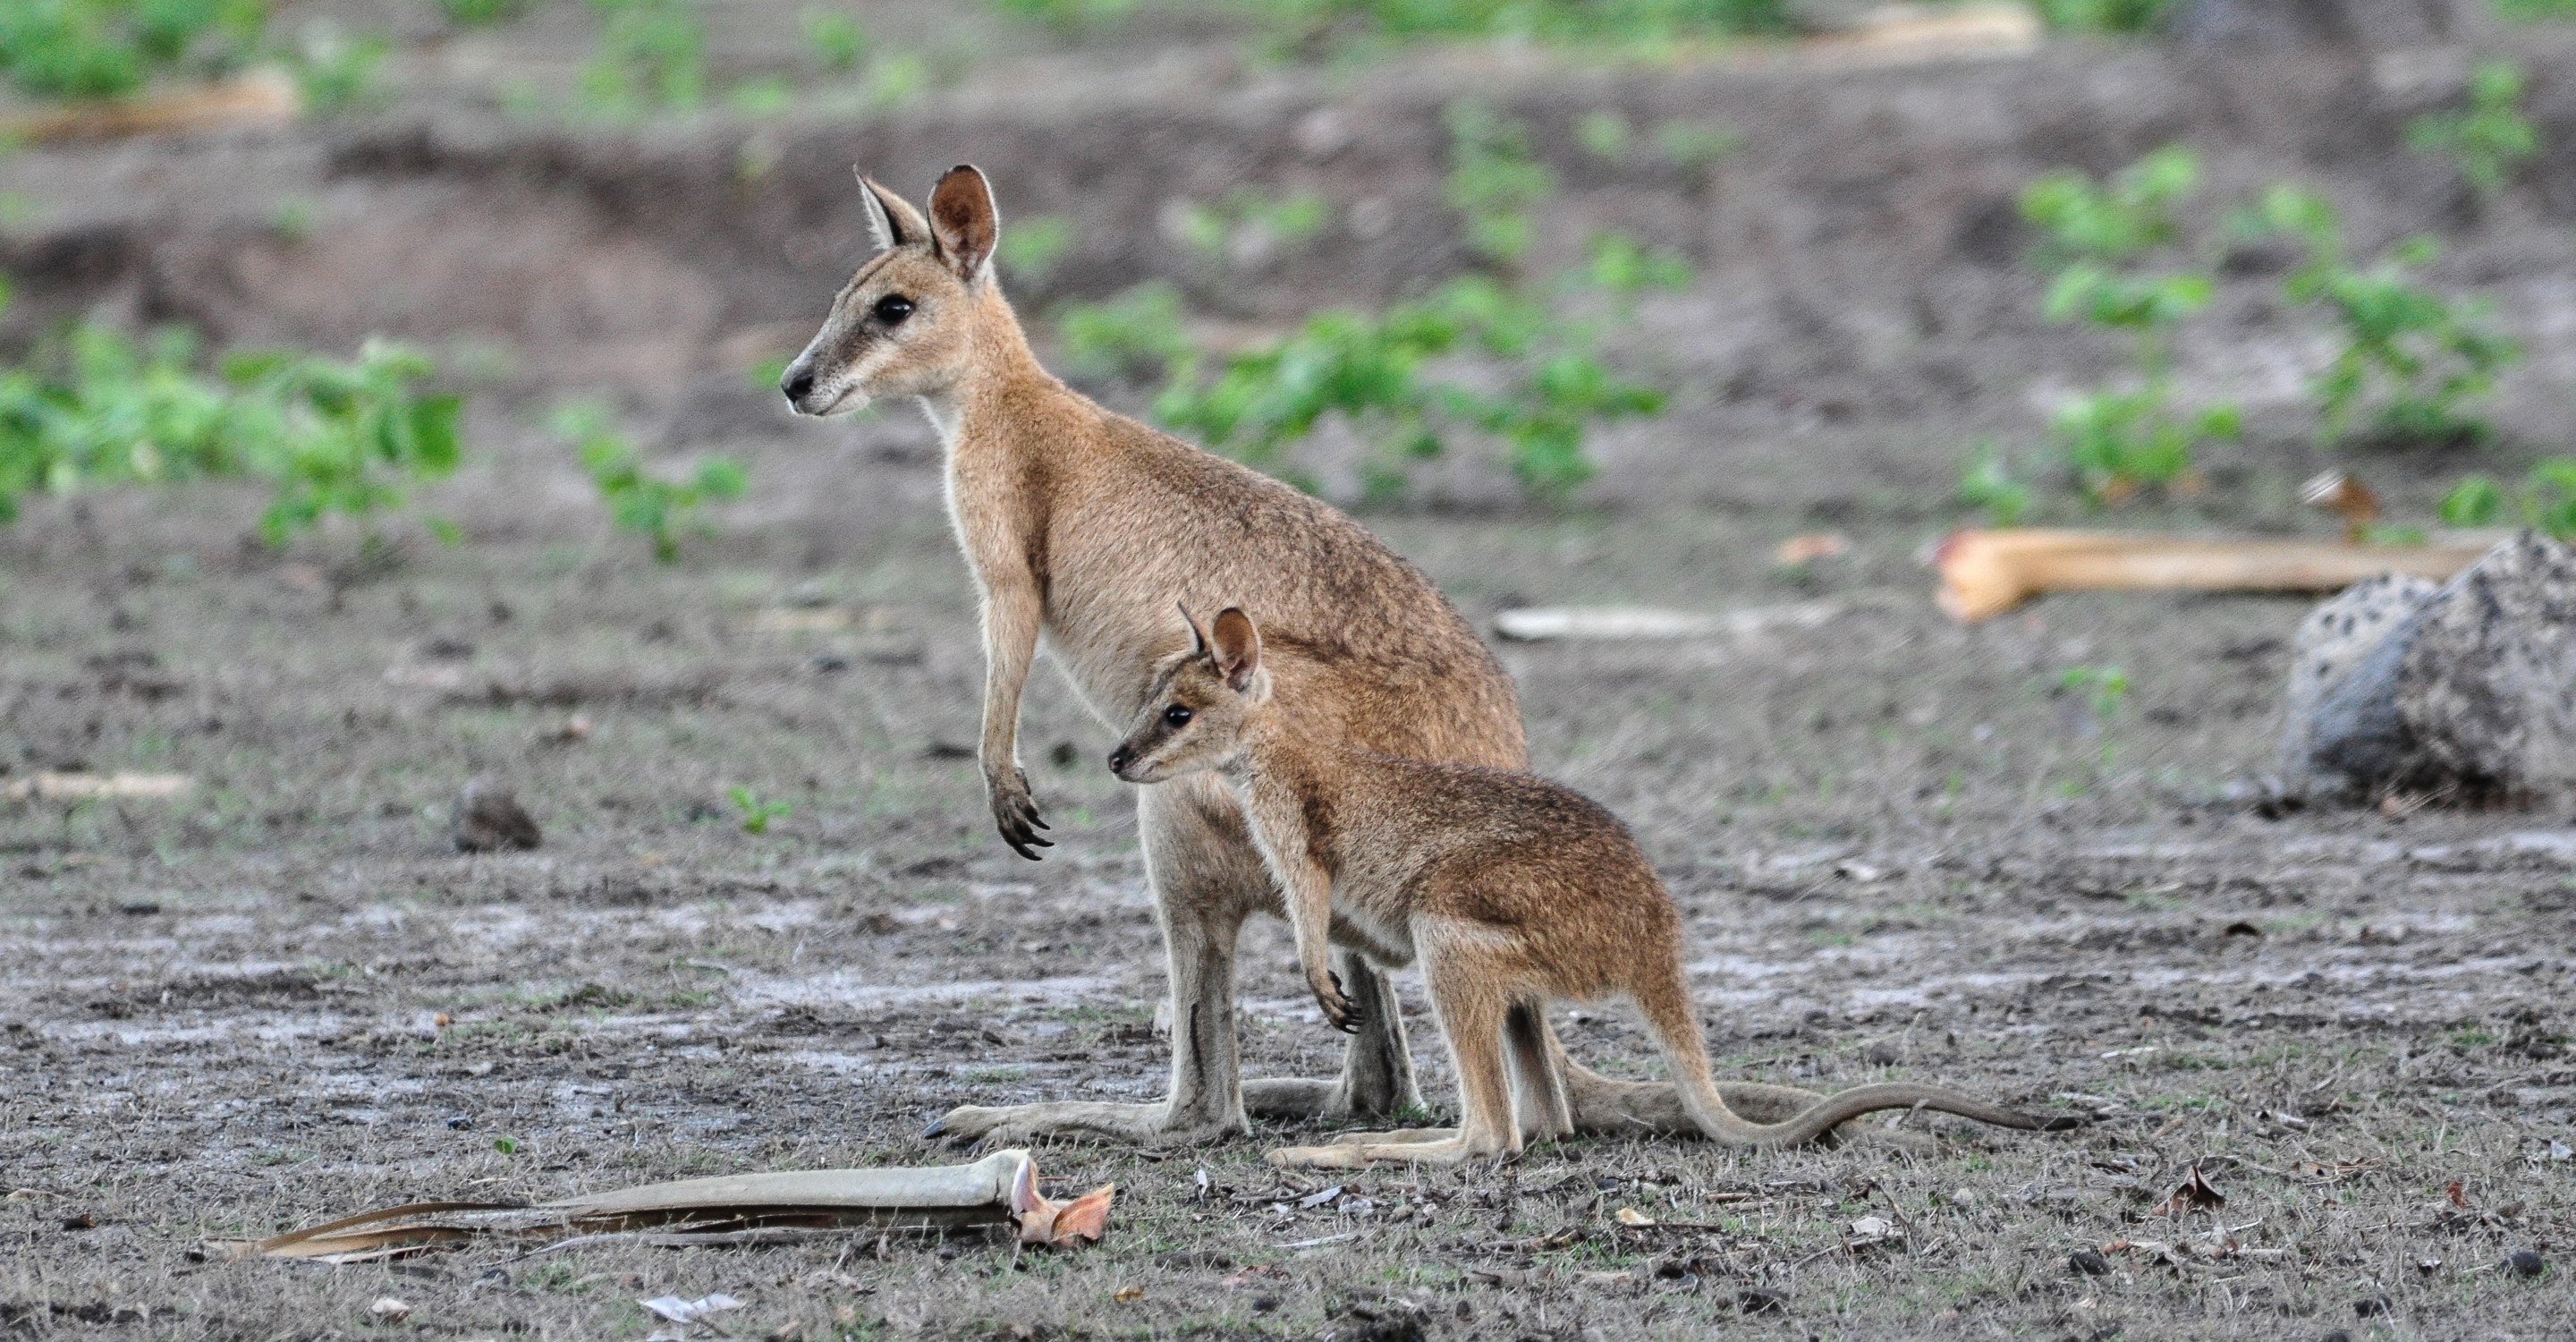 Sandy wallaby with a joey in her pouch, Bamurru Plains, Australia